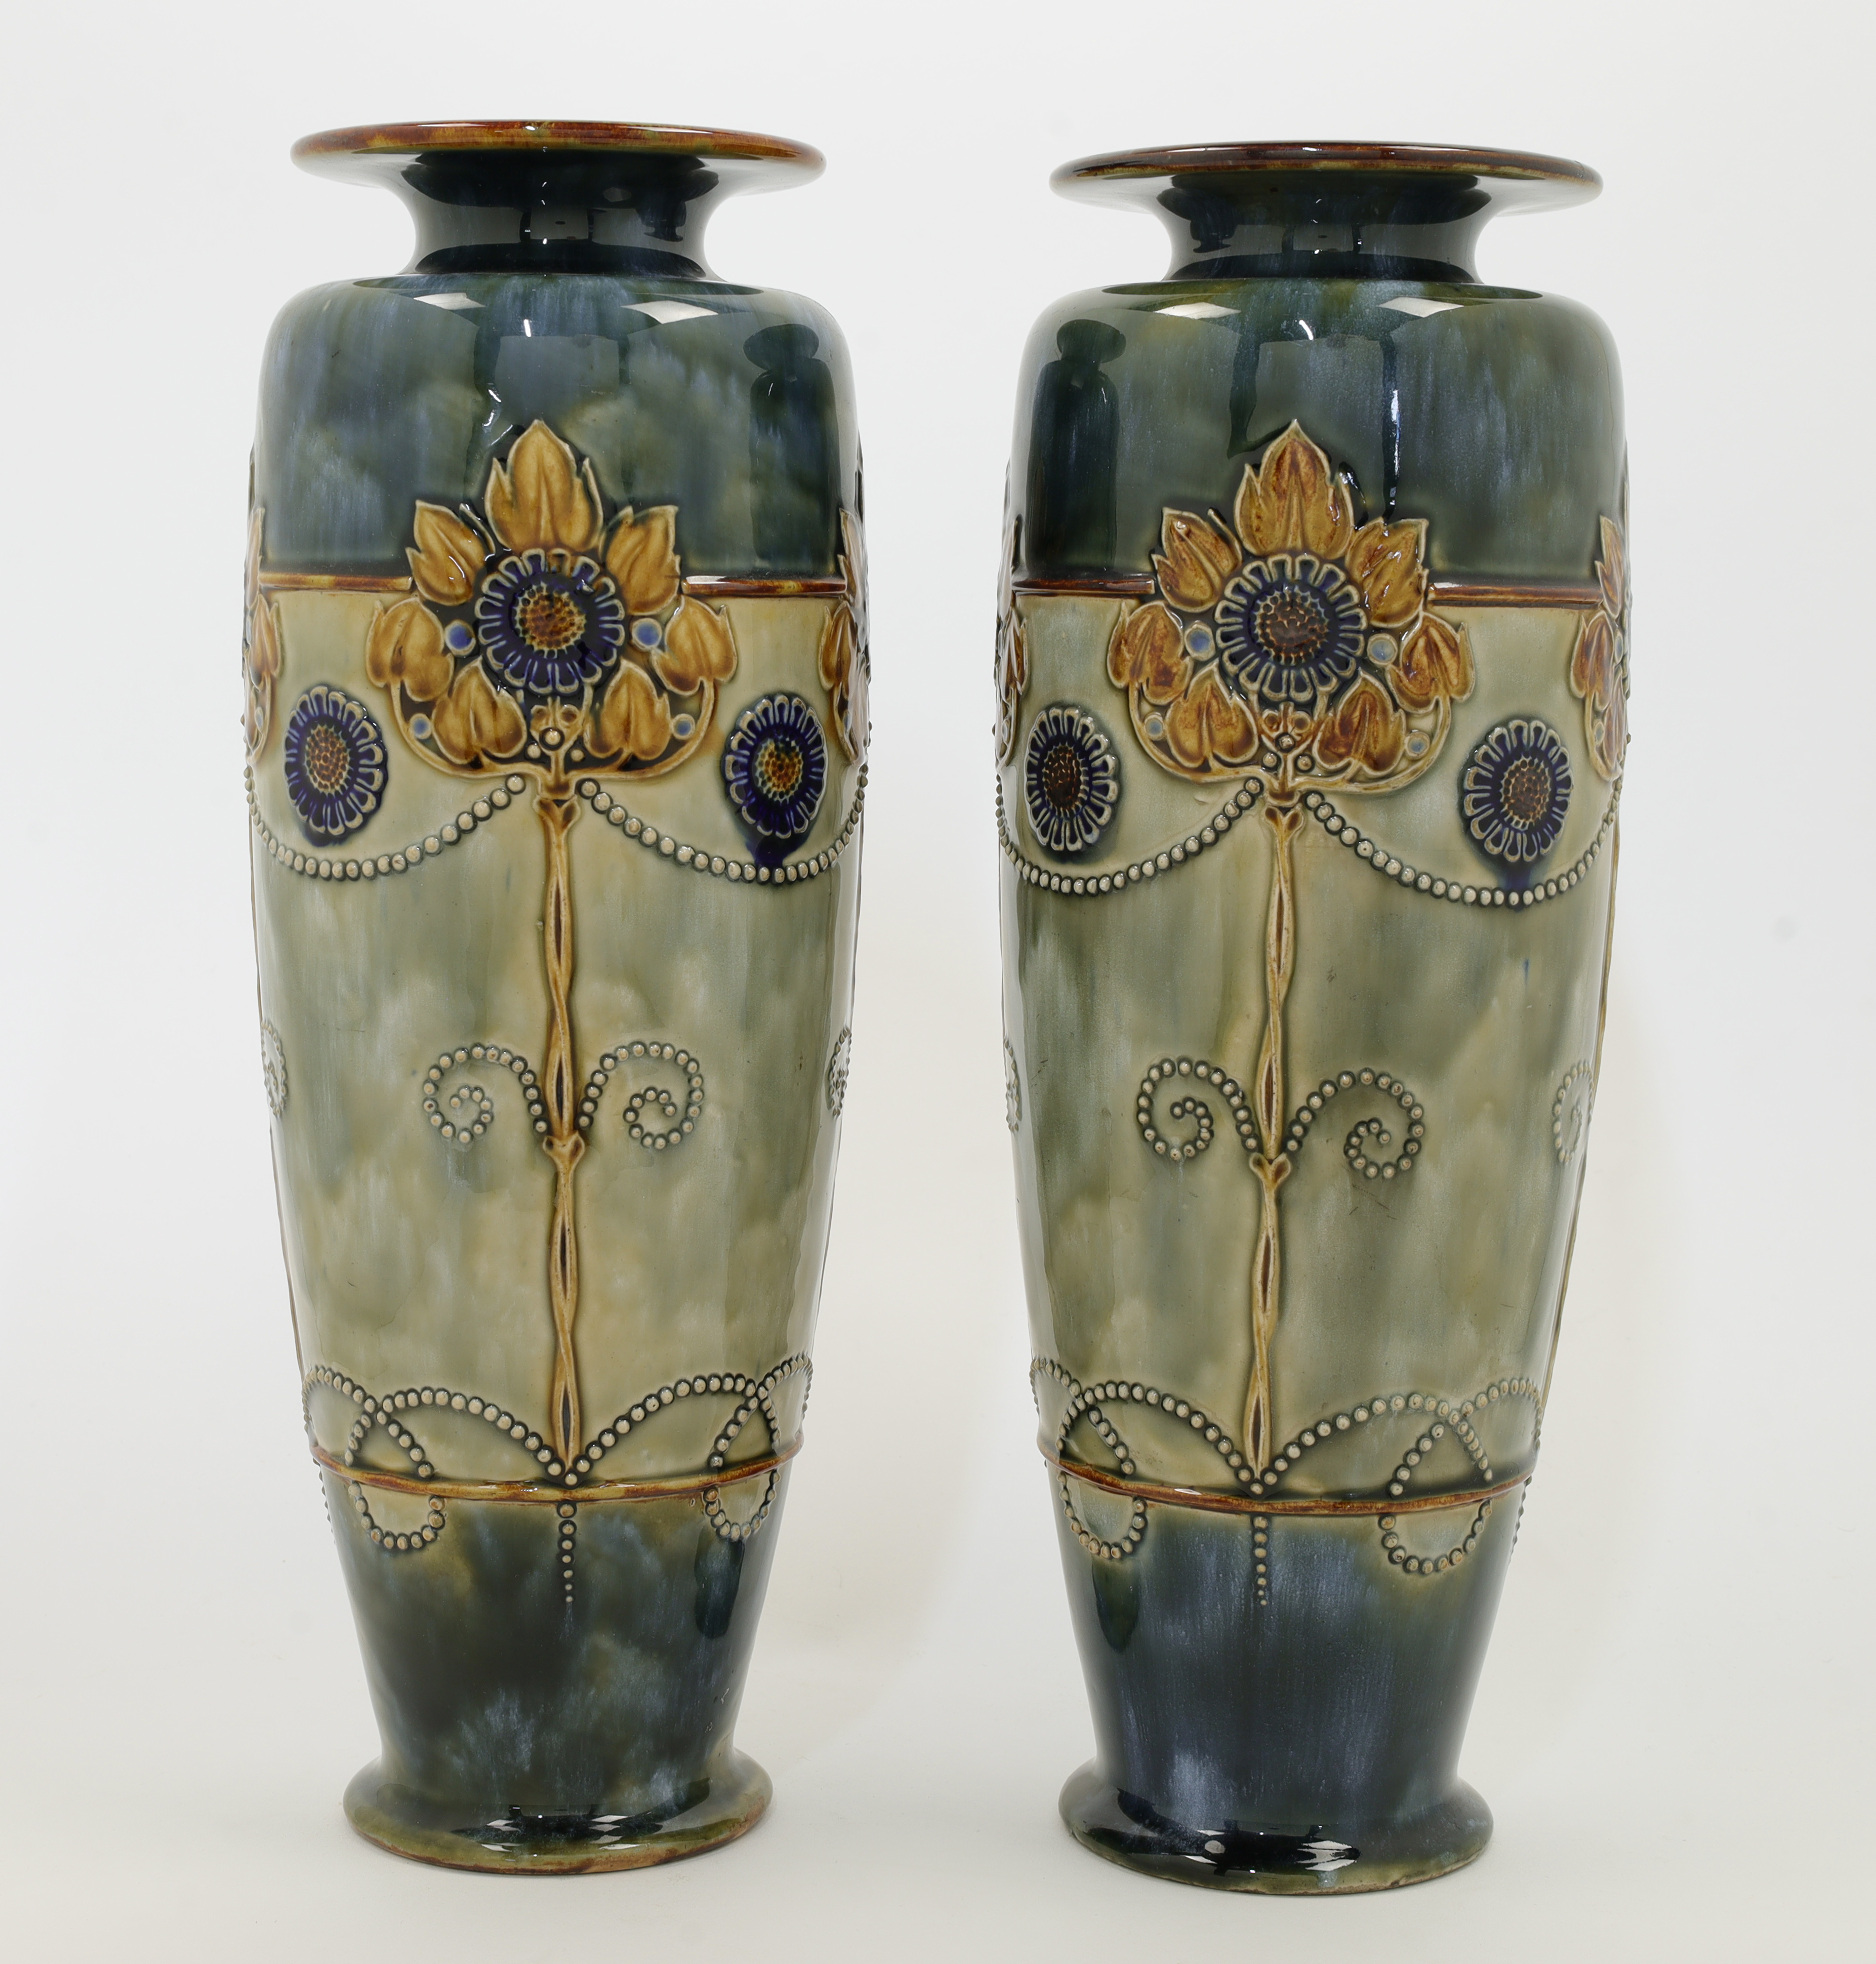 A pair of Doulton Lambeth stoneware vases, early 20th century, impressed lion and crown with Roya...